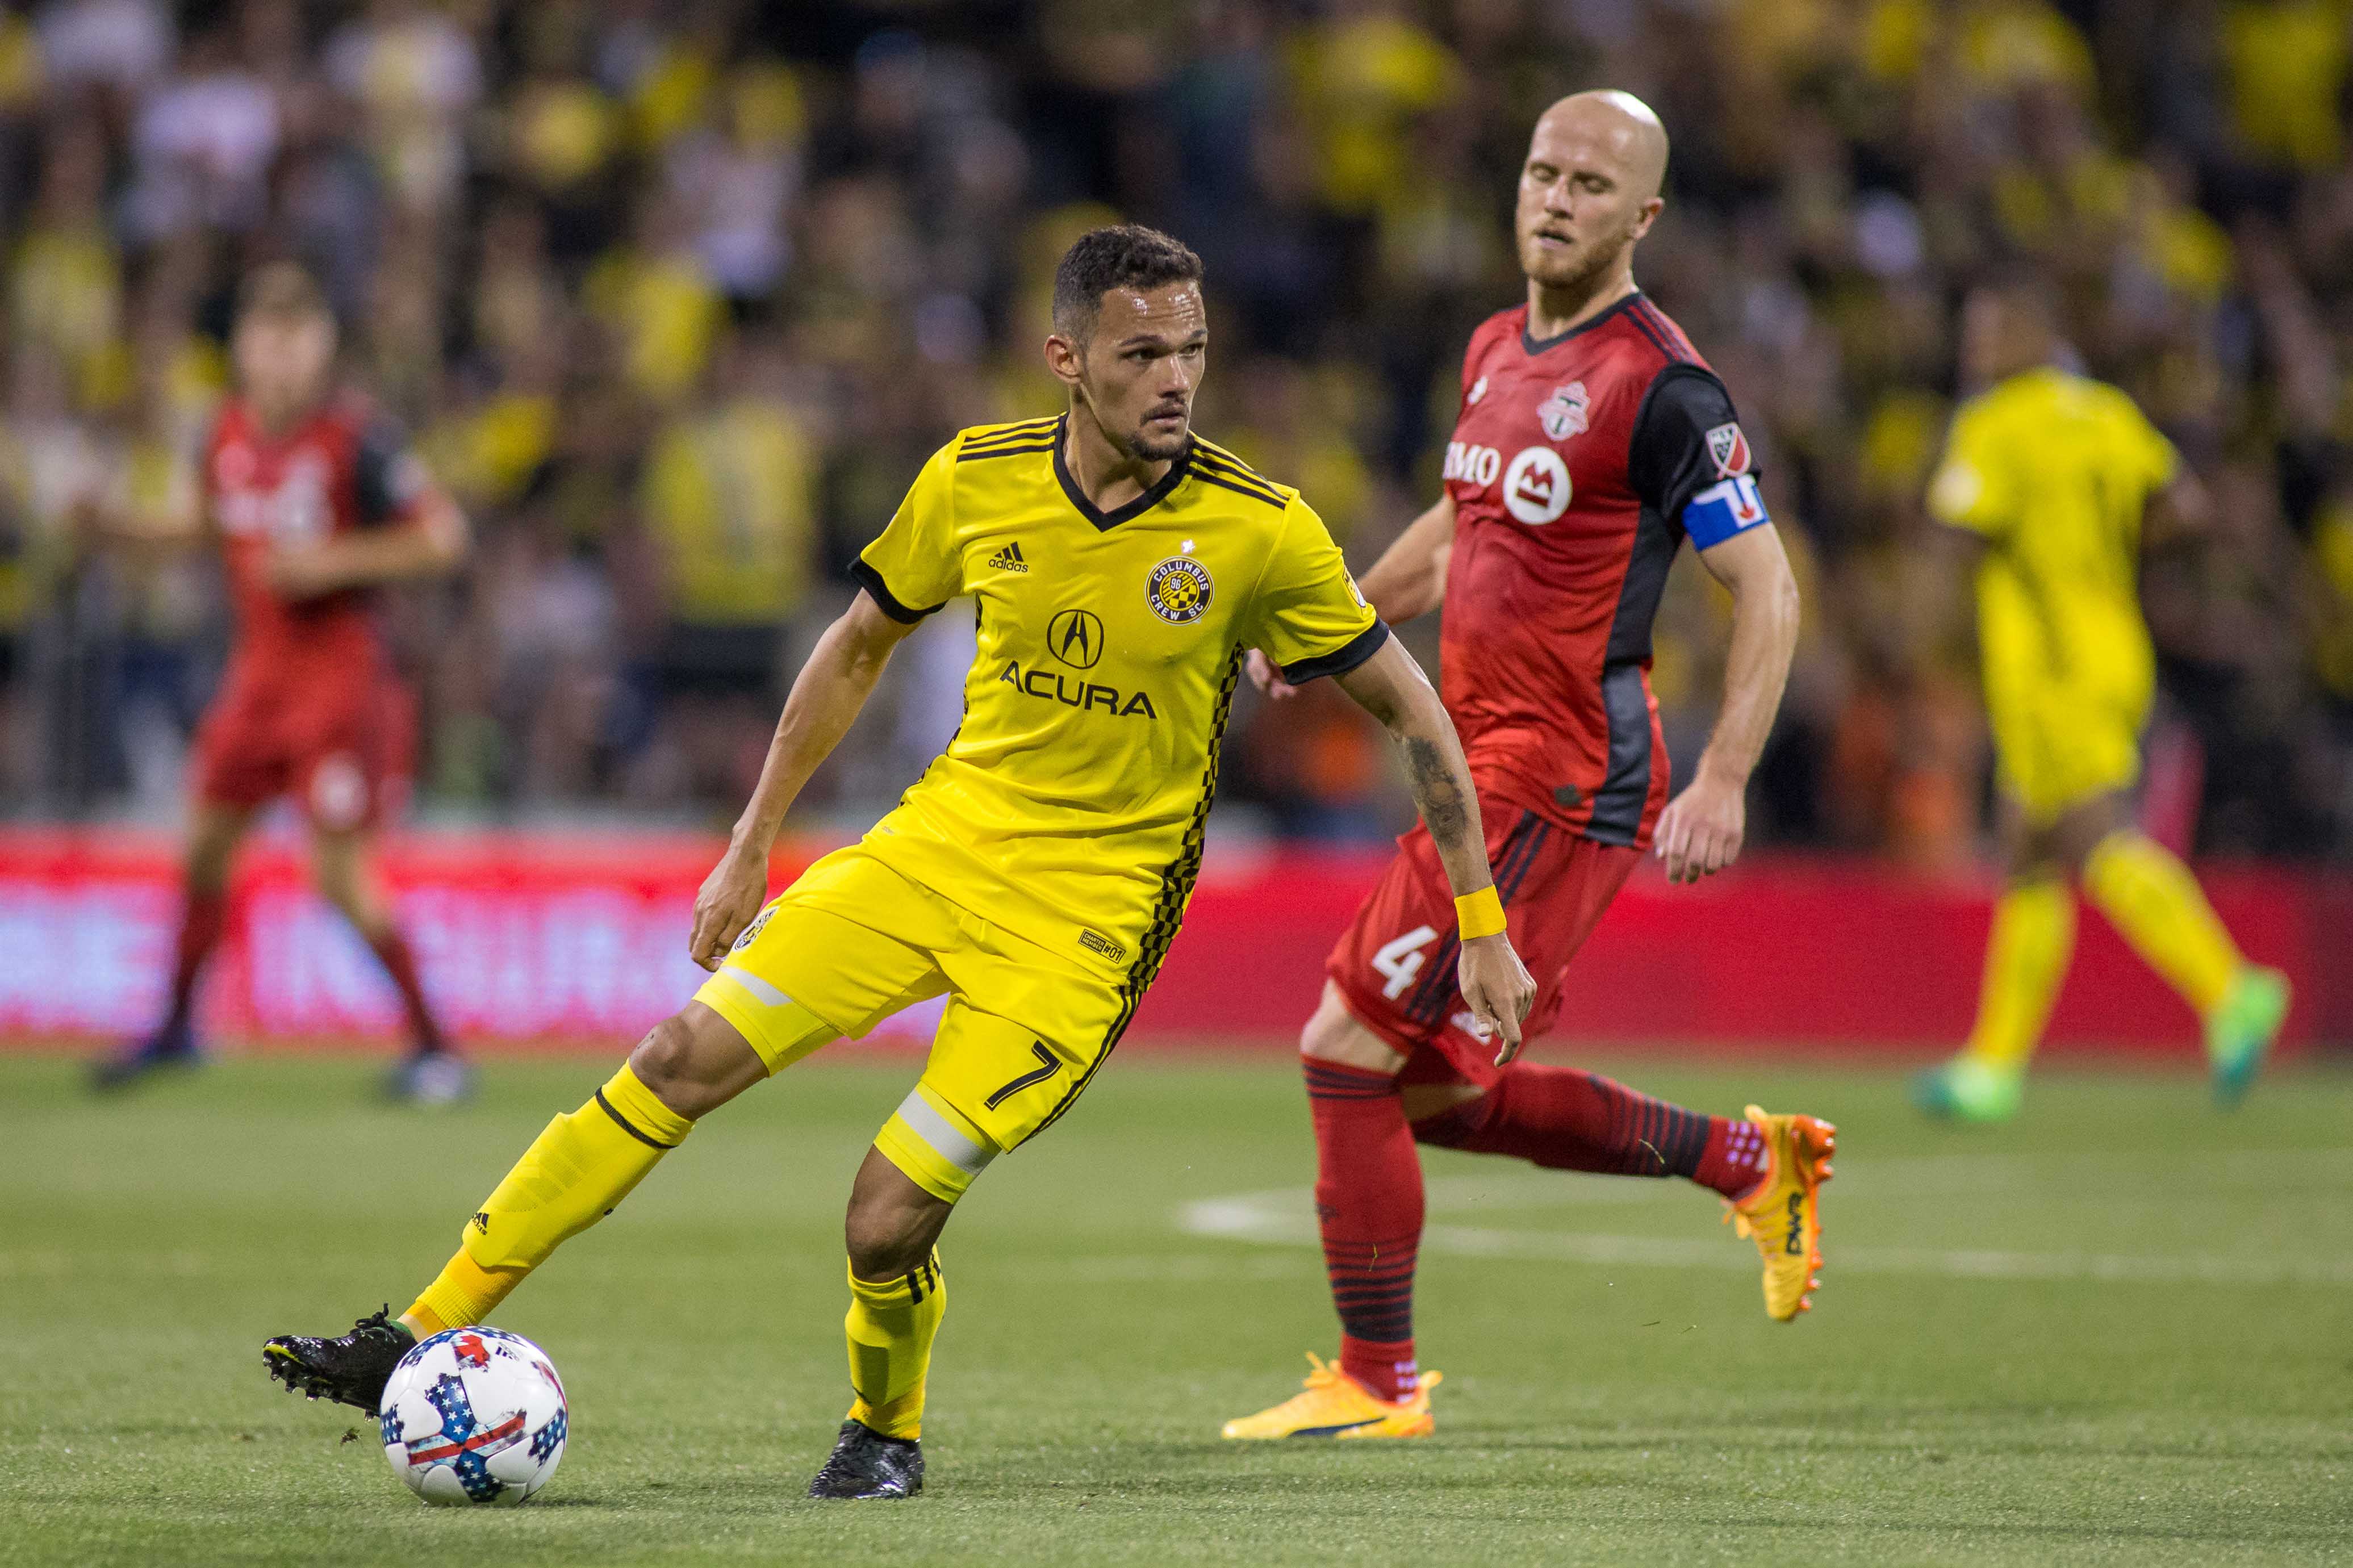 Columbus Crew vs. NYCFC: Preview and How to Watch